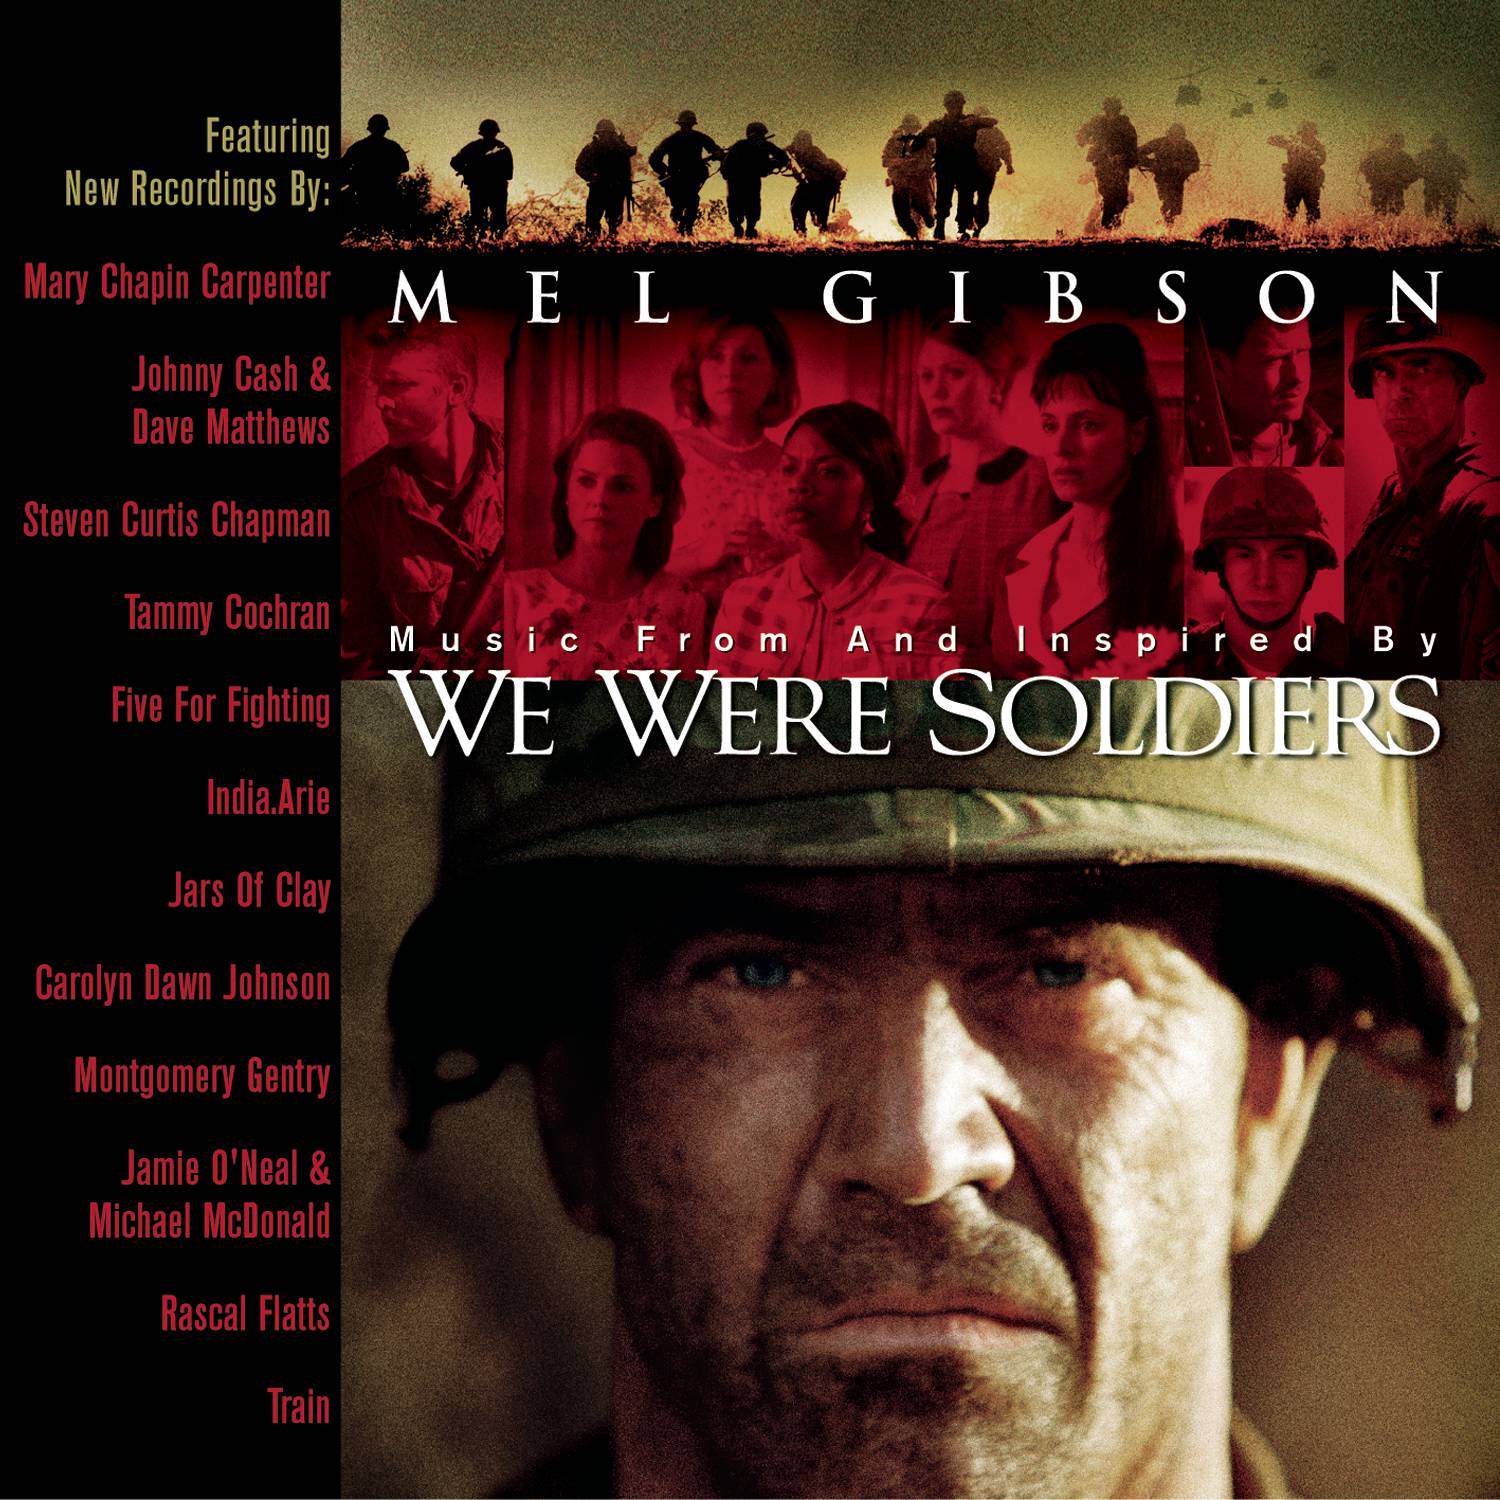 Music From and Inspired By WE WERE SOLDIERS